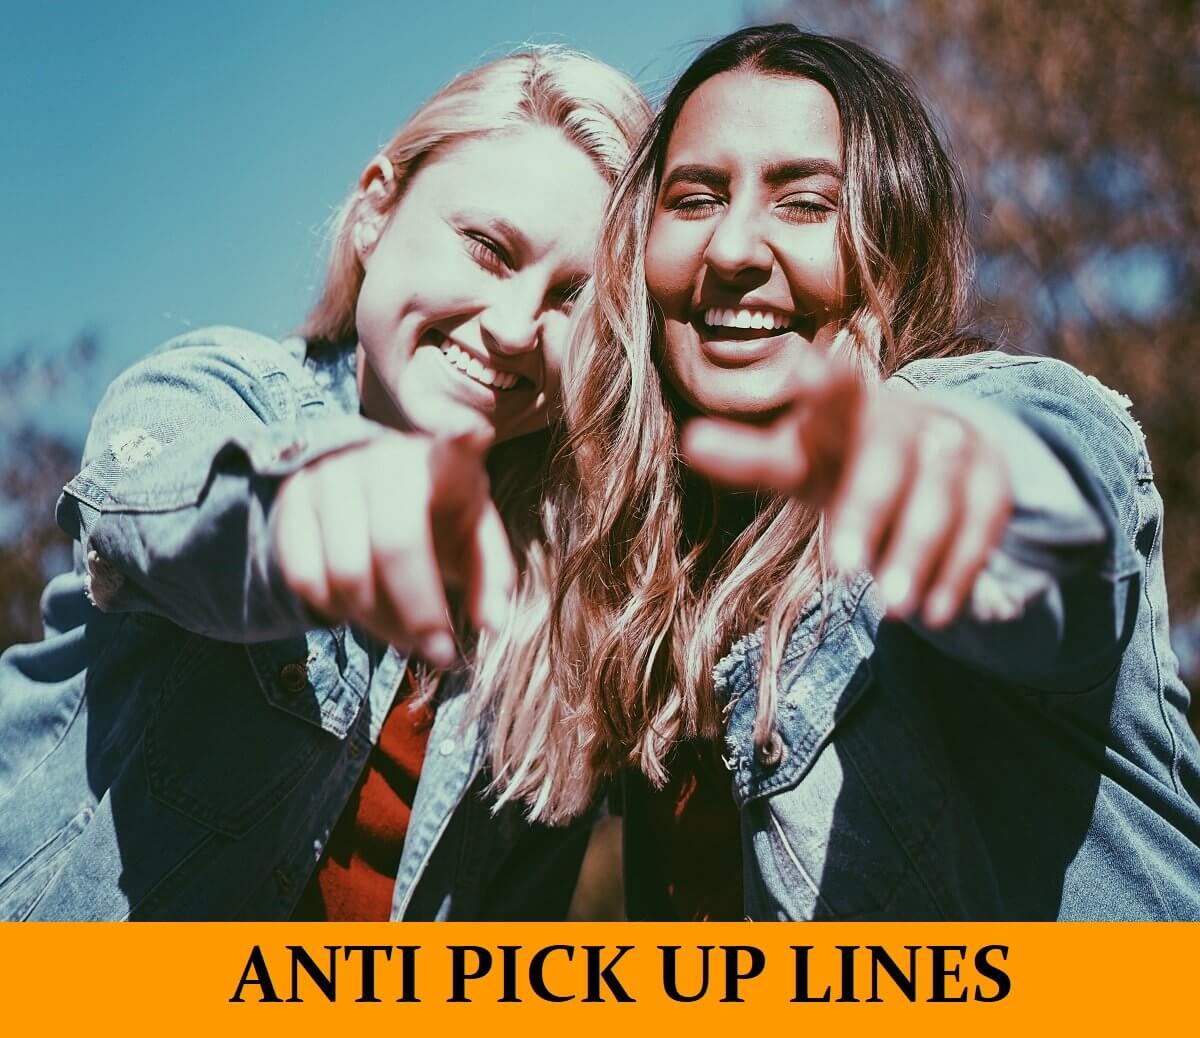 234 Anti Pick Up Lines » Flirt and Score with Best Puns and Phrases